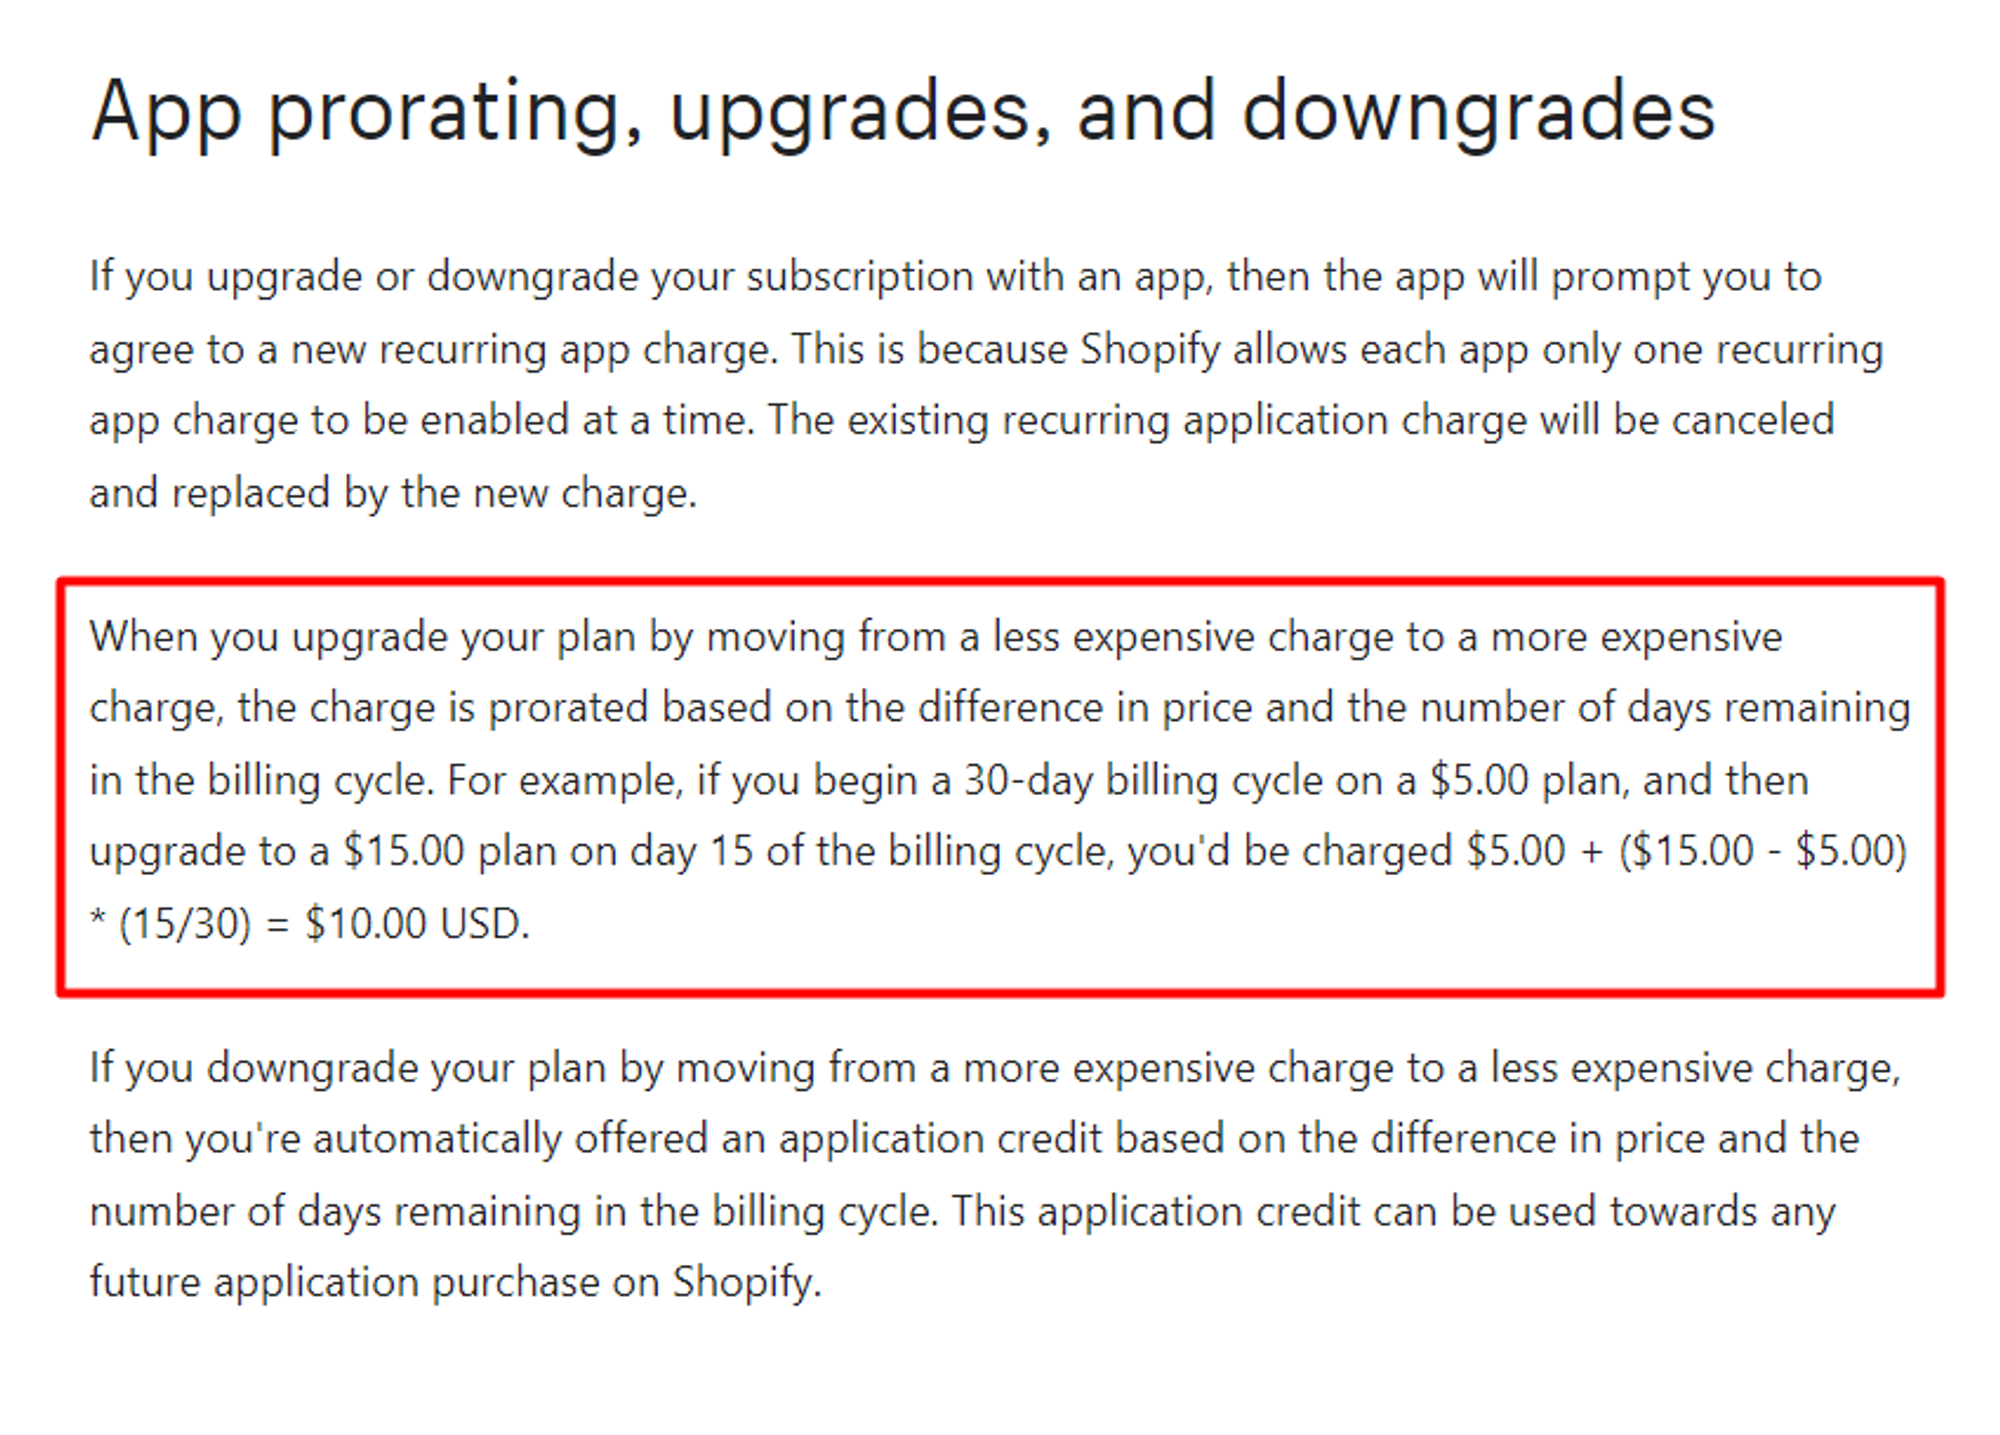 Shopify Official documentation of how the upgrade reflects in your billing invoice.